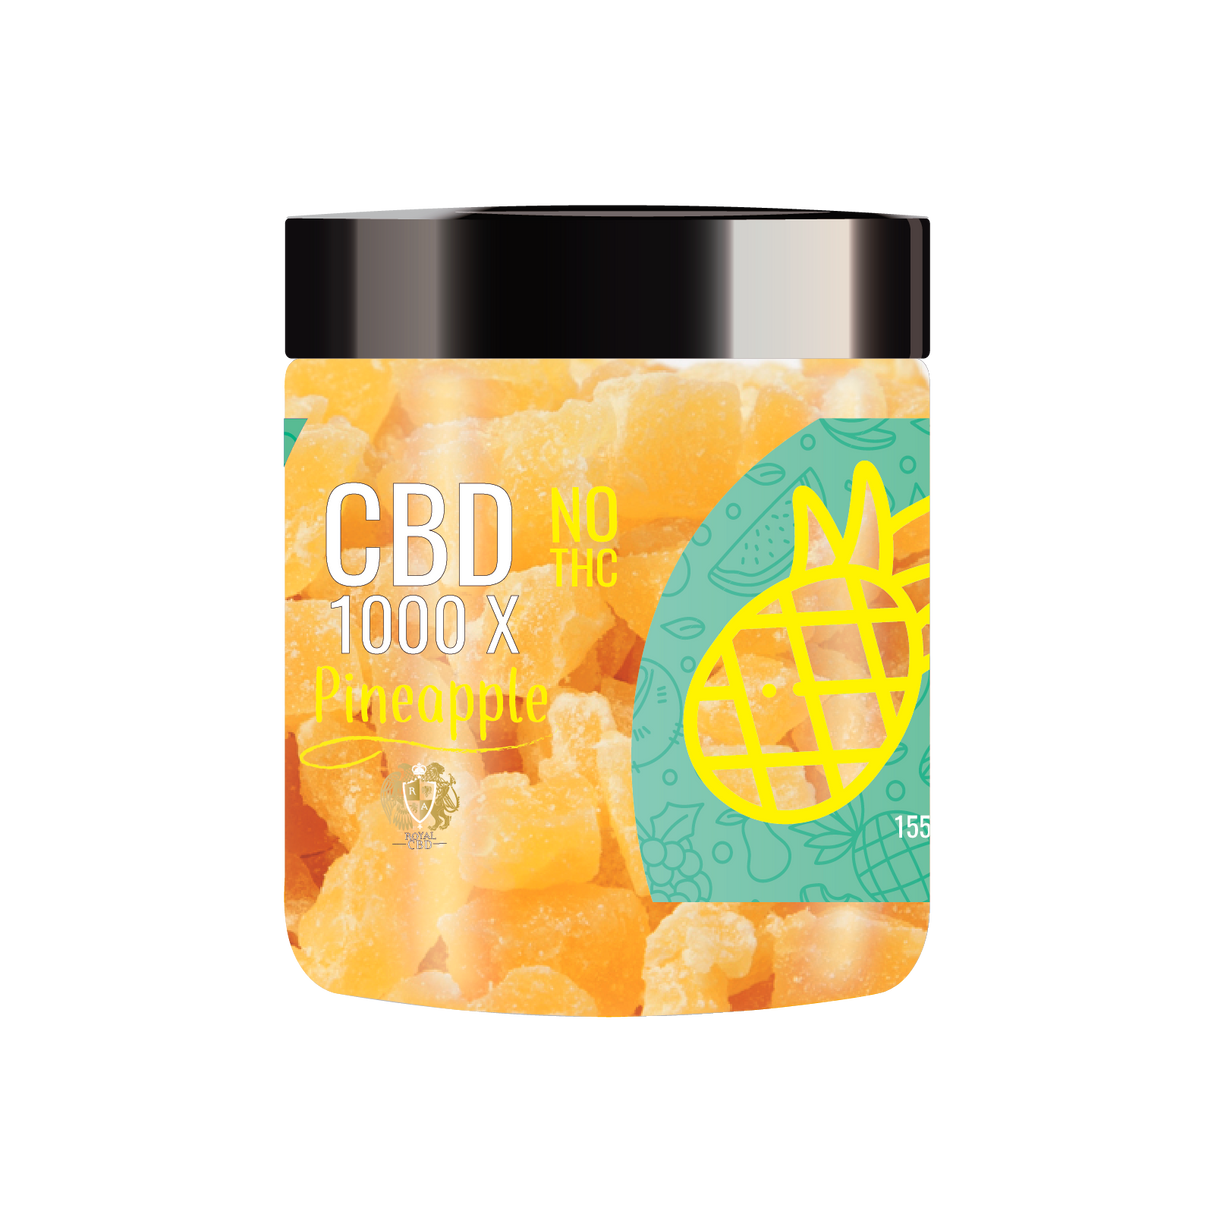 Our CBD Dried Pineapple Fruit.